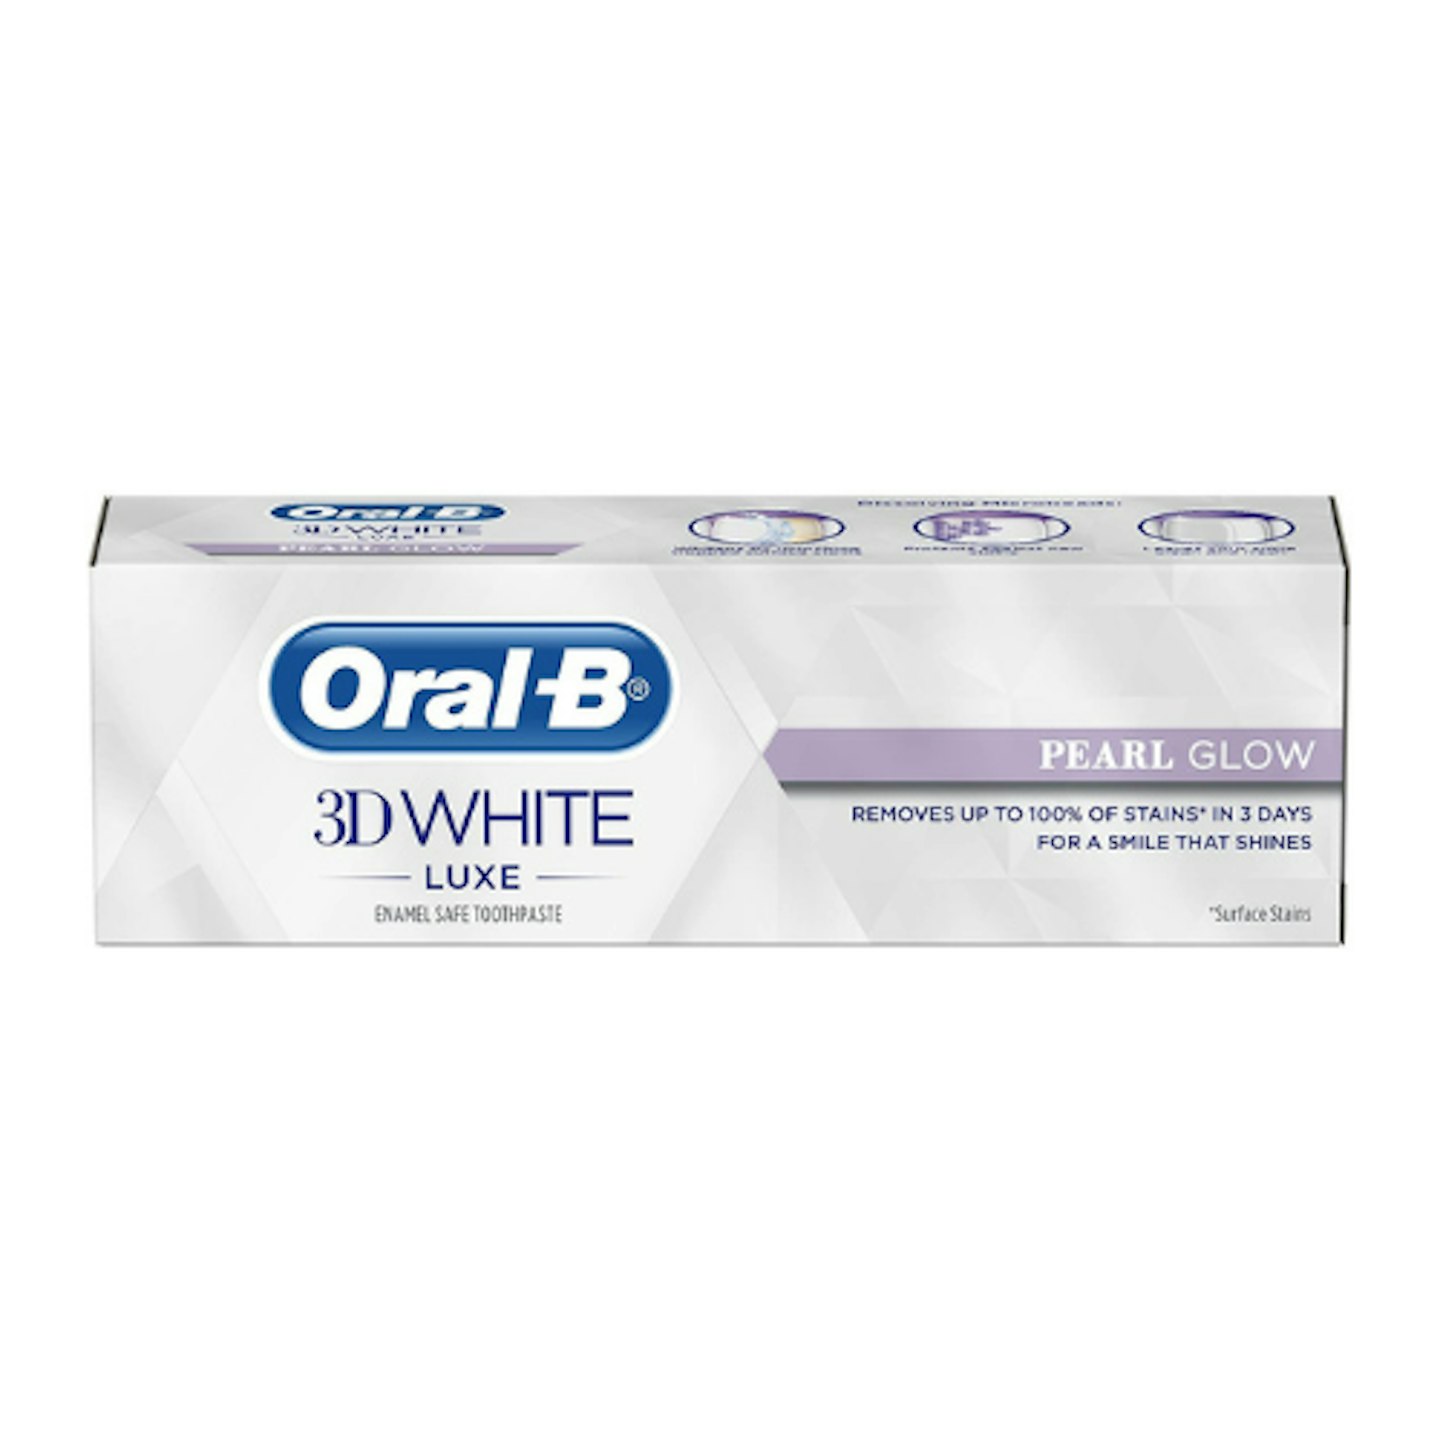 Oral B 3D white toothpaste on a white background